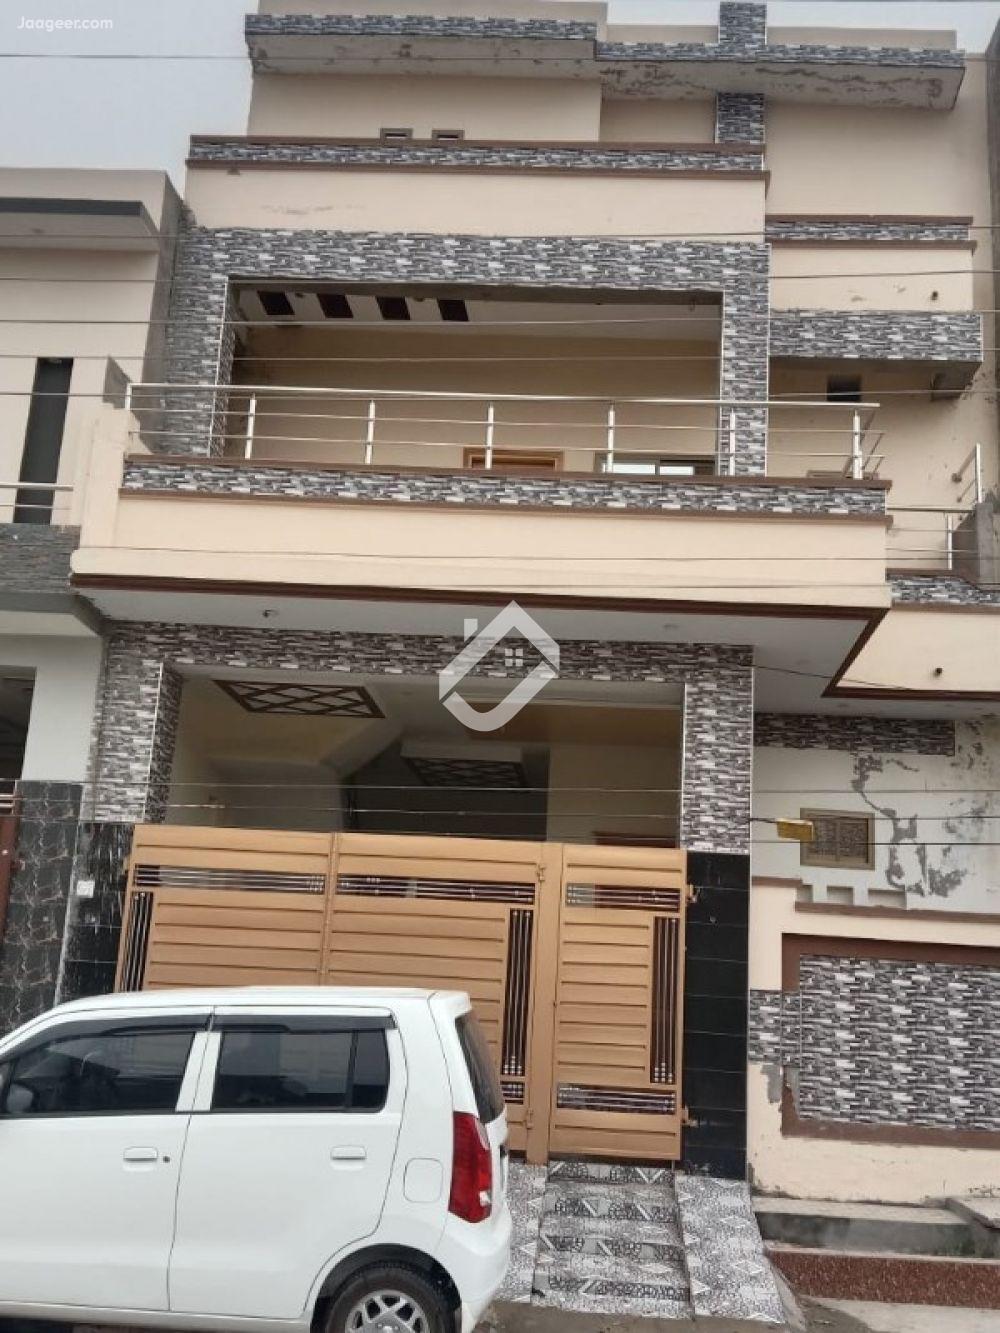 View  5 Marla Double Storey House For Sale In Asad Park Phase 2 in Asad Park Phase 2, Sargodha